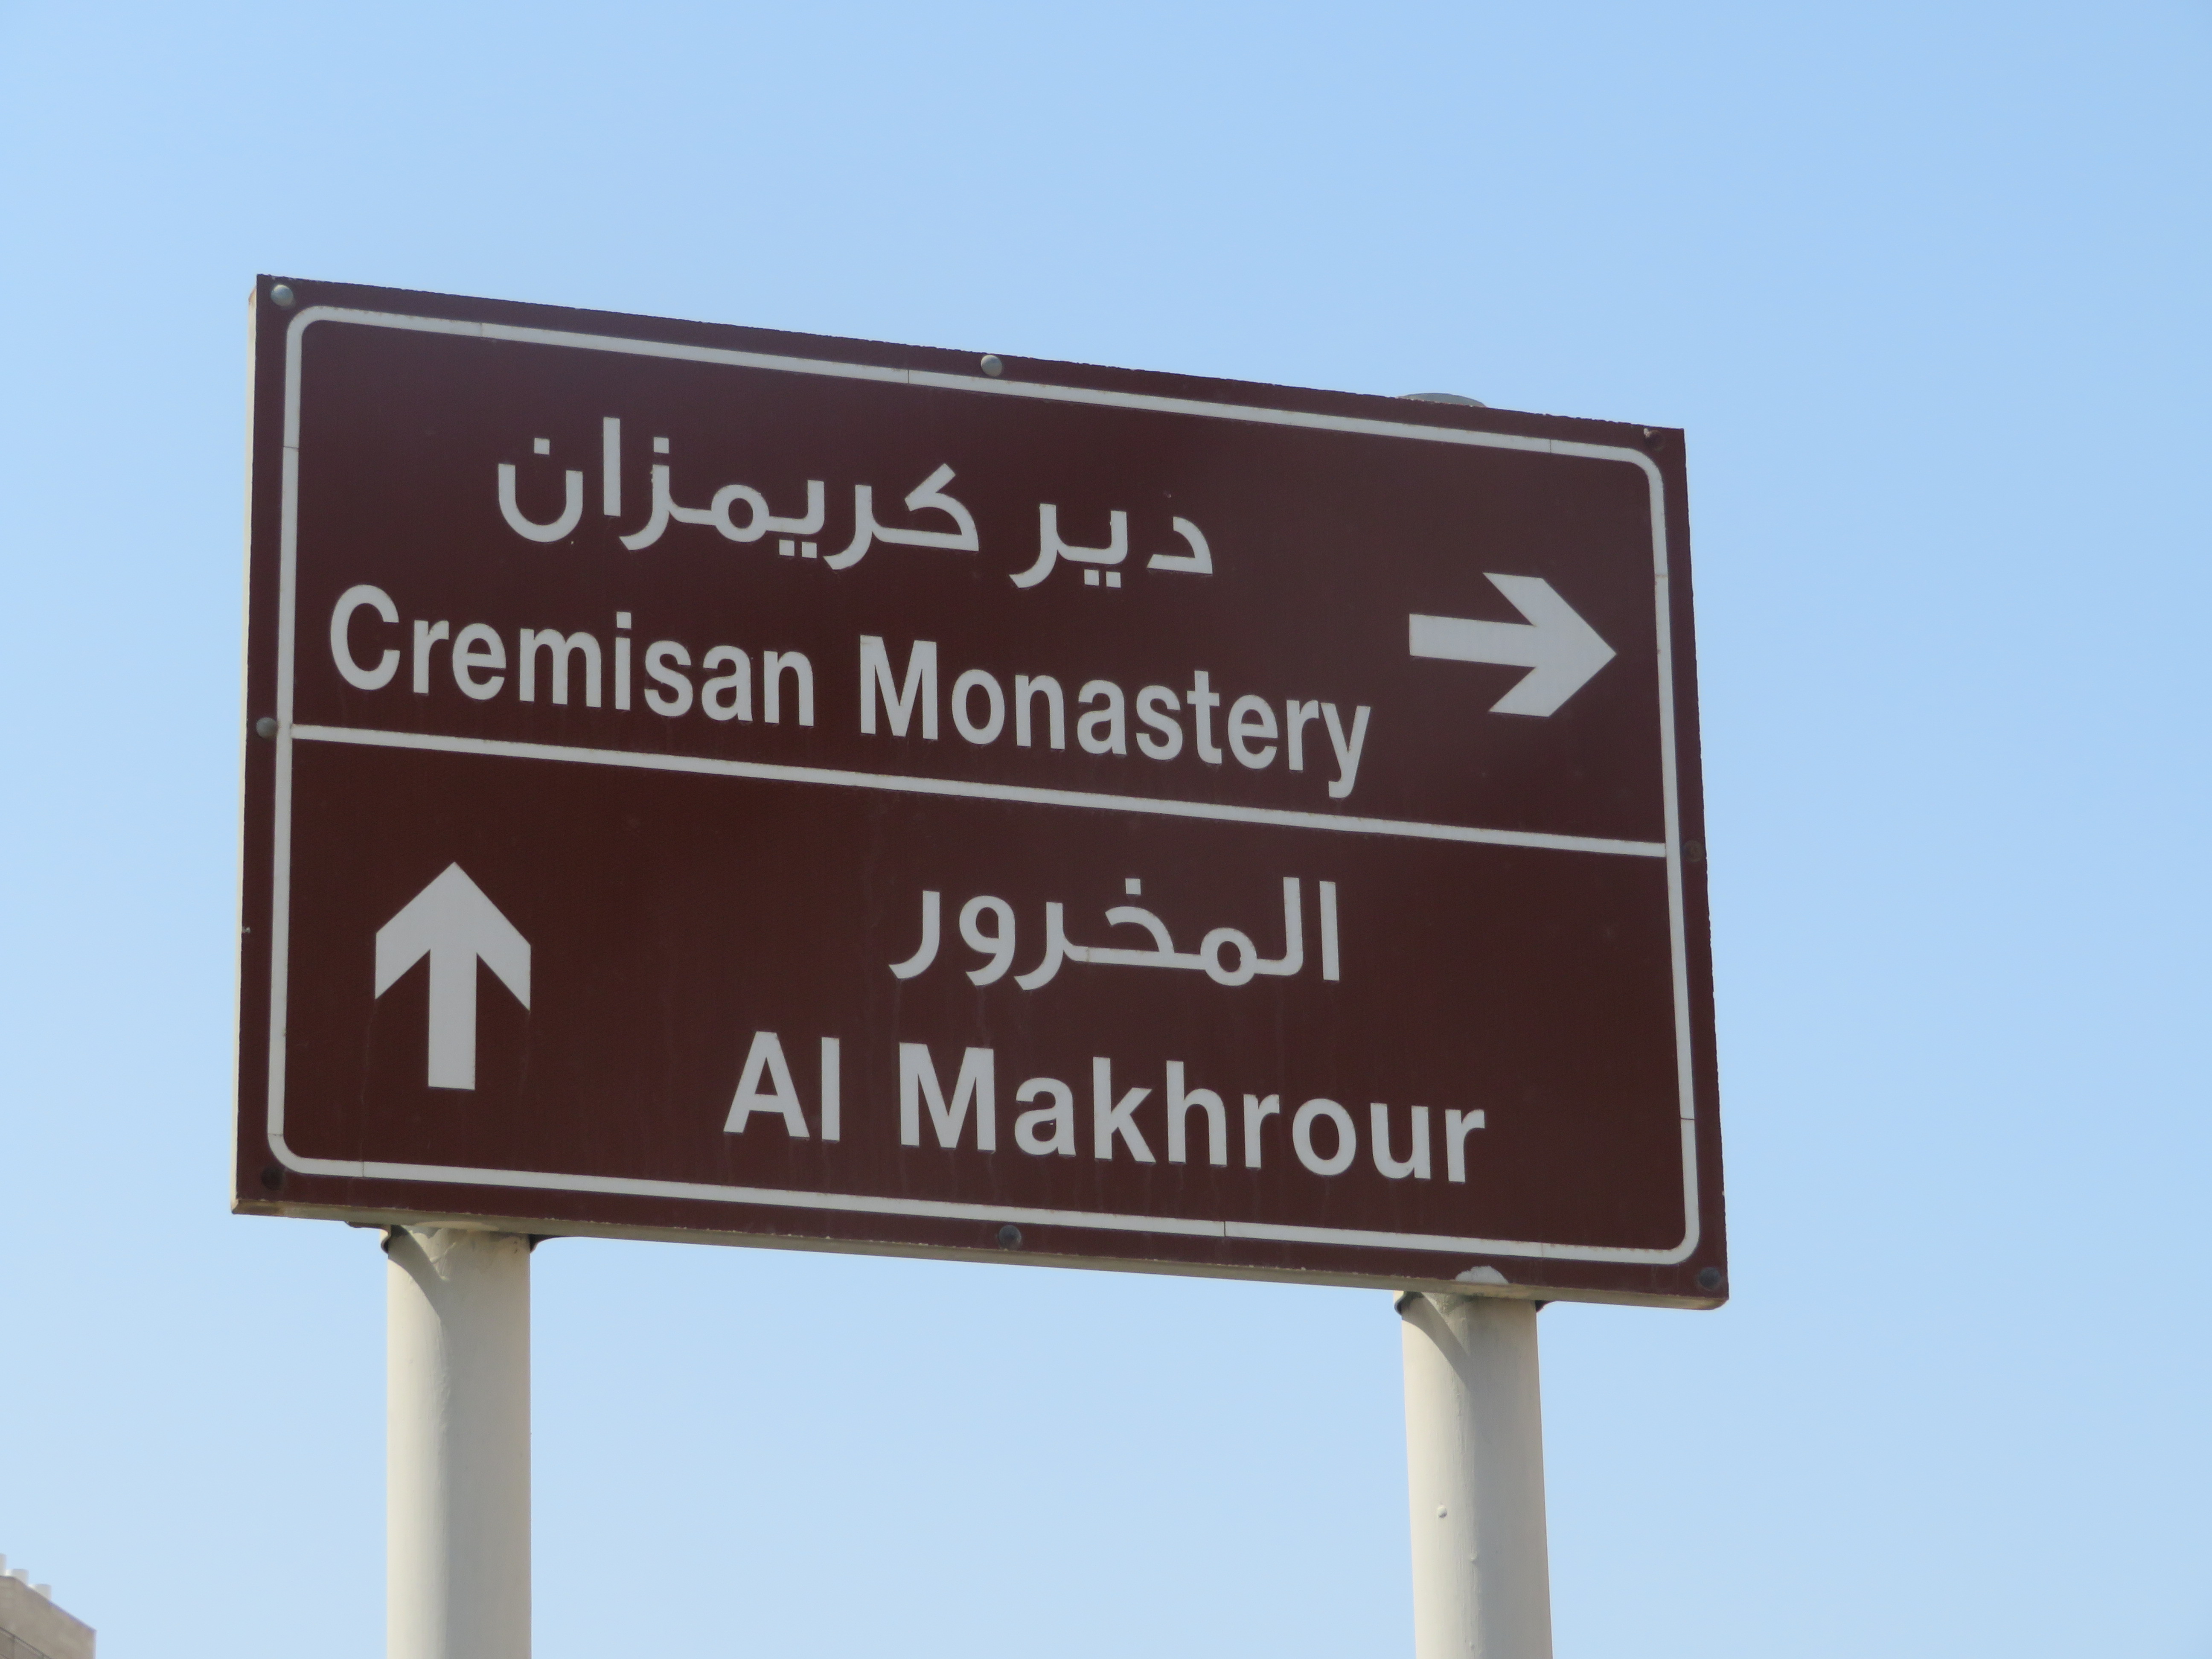 A sign points to Al Makhrour - the agricultural land of Beit Jala.